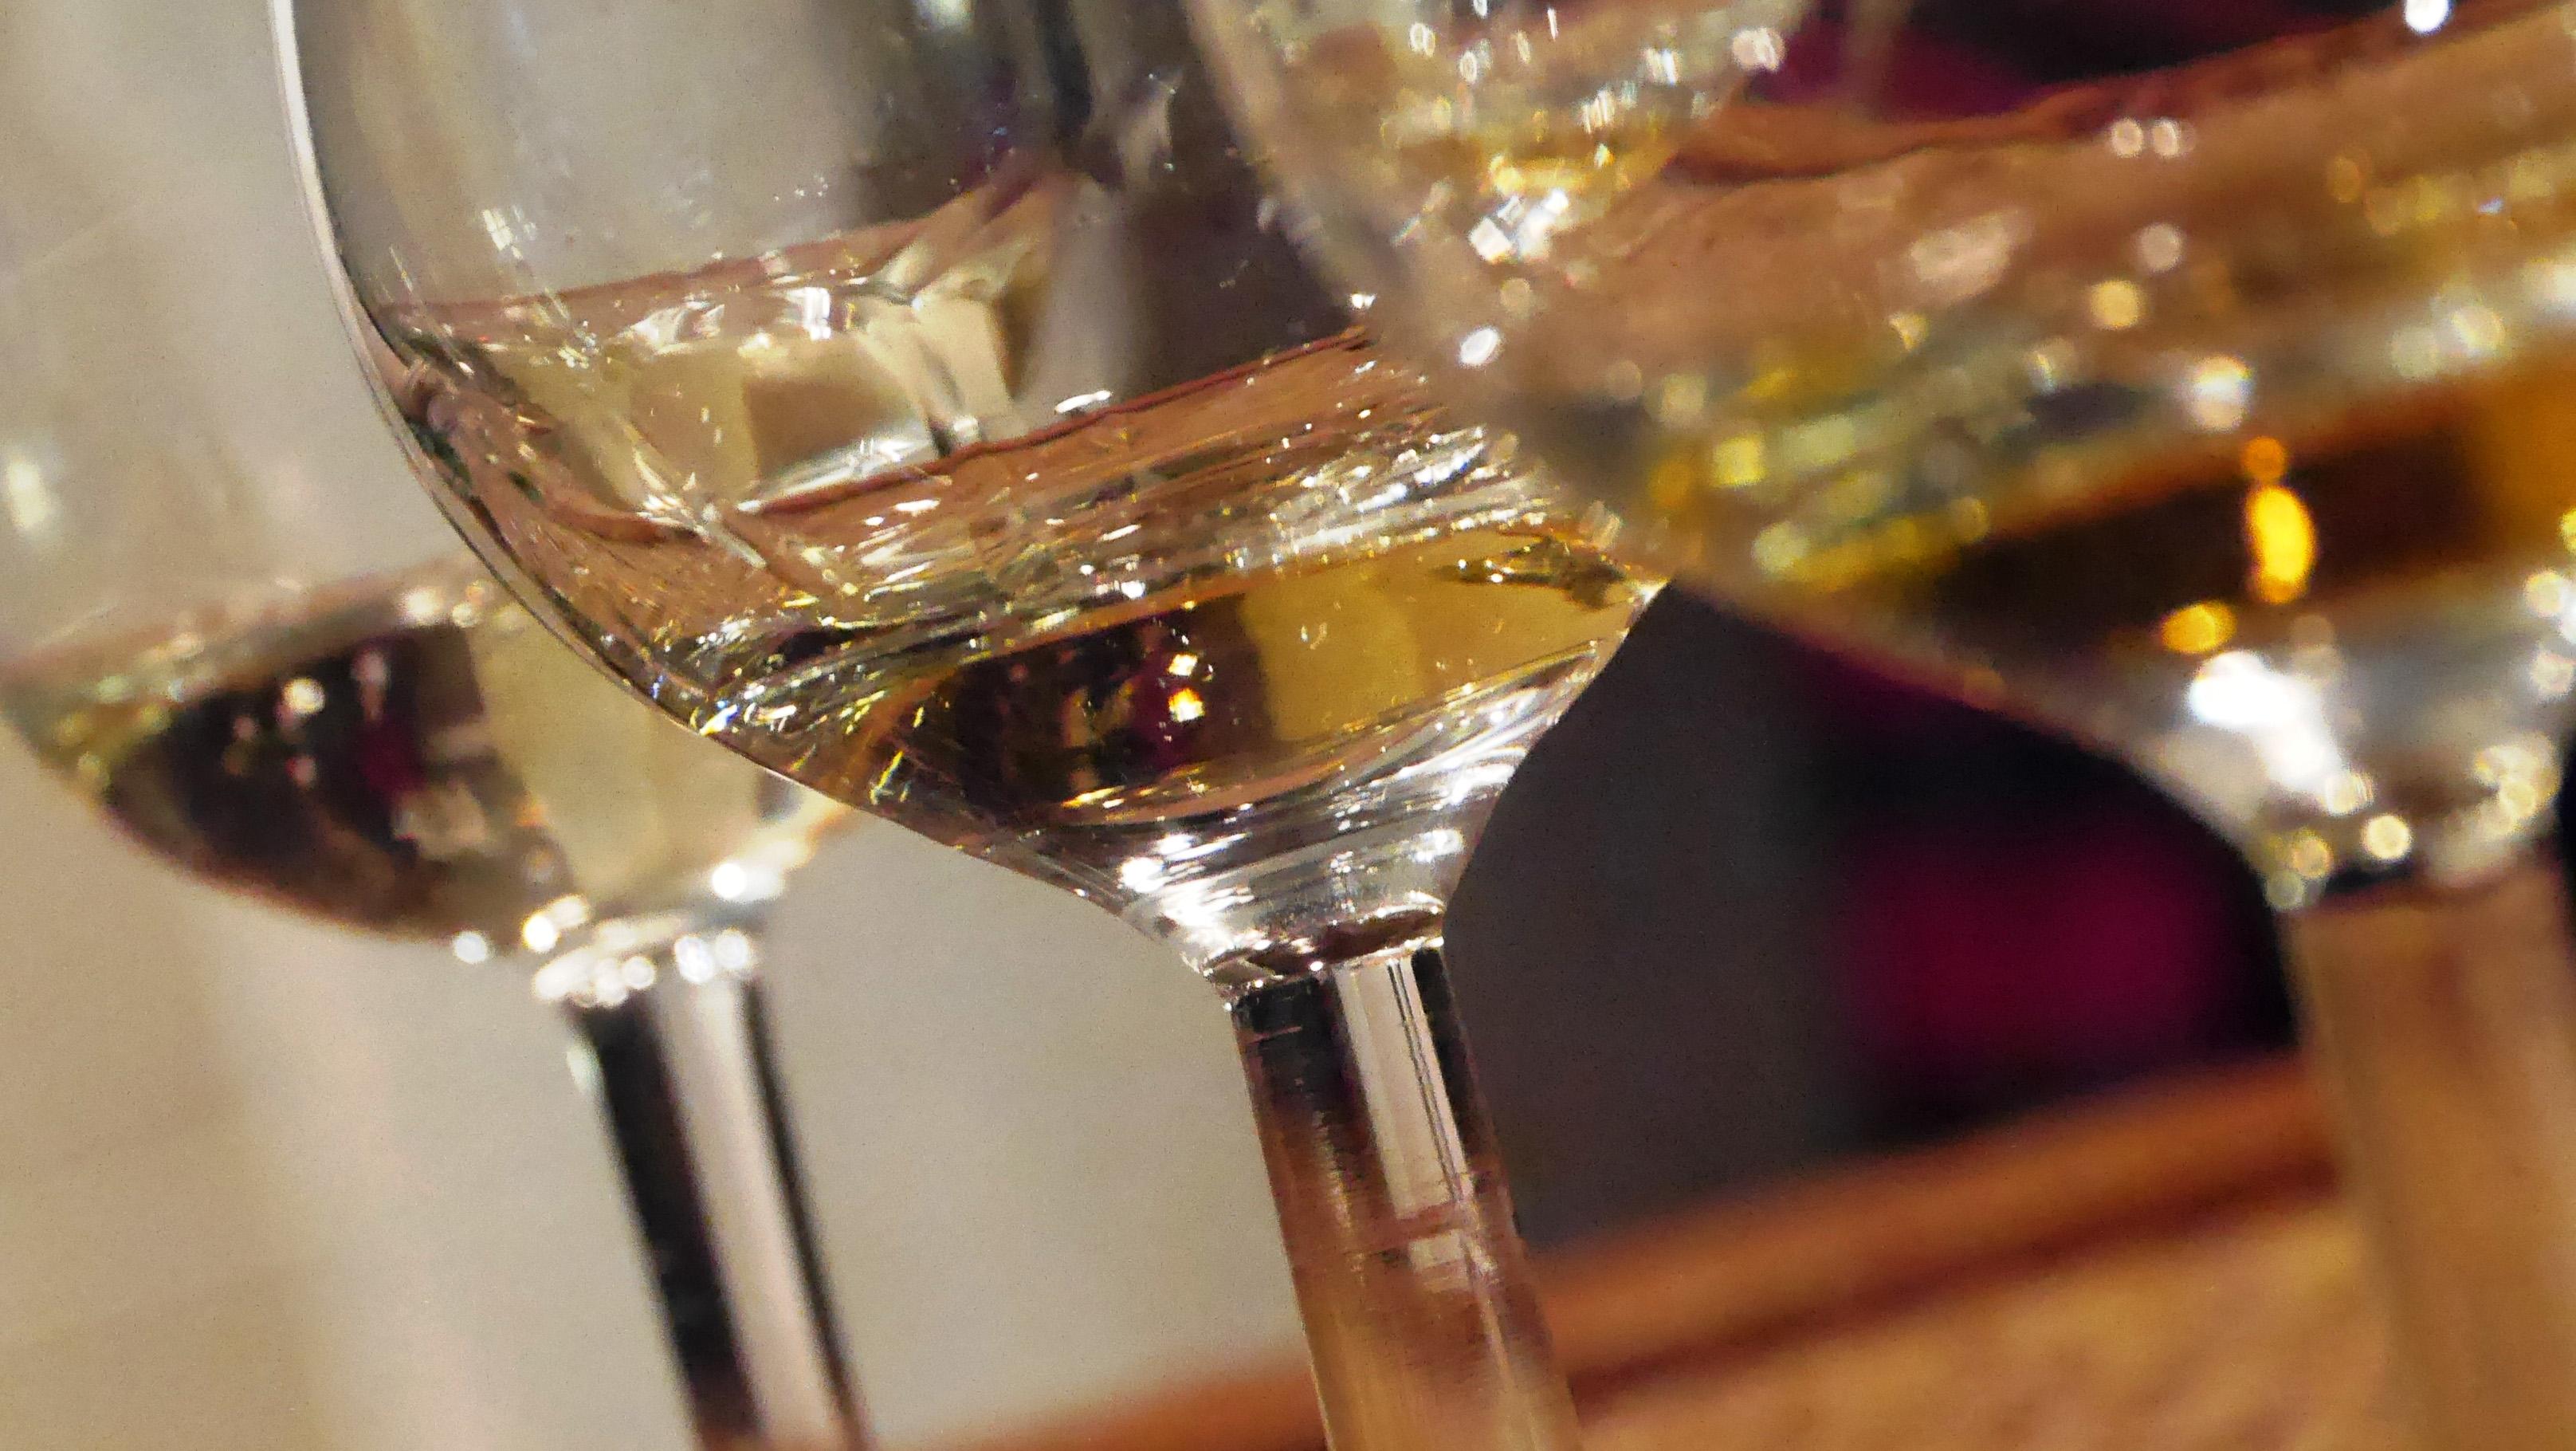 Sample wines from 12 vendors at the inaugural Chicago Wine Fest. (Travel Oriented / Flickr)